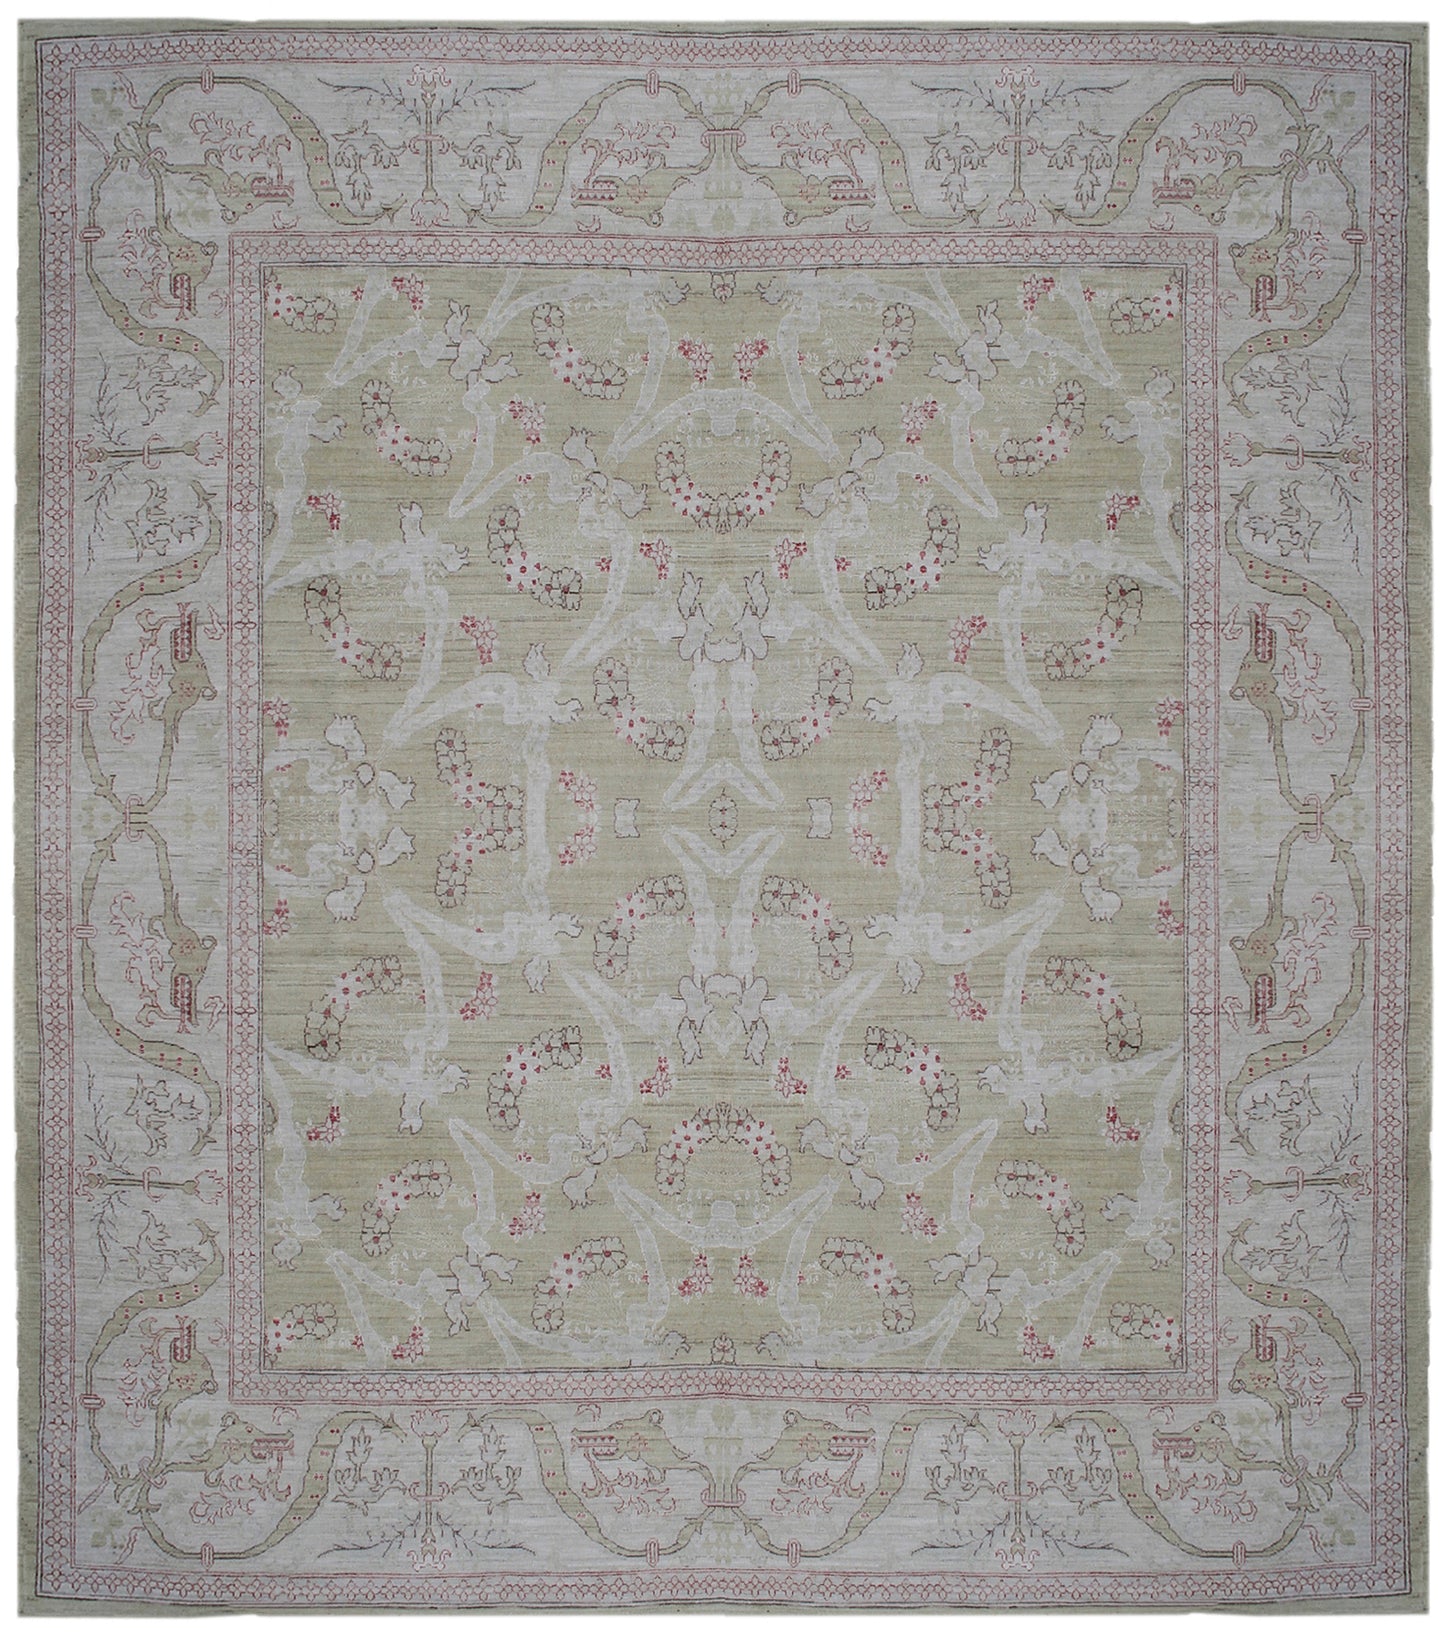 10'x8' Decorative High Quality Soft Green and Ivory Ariana Transitional Rug